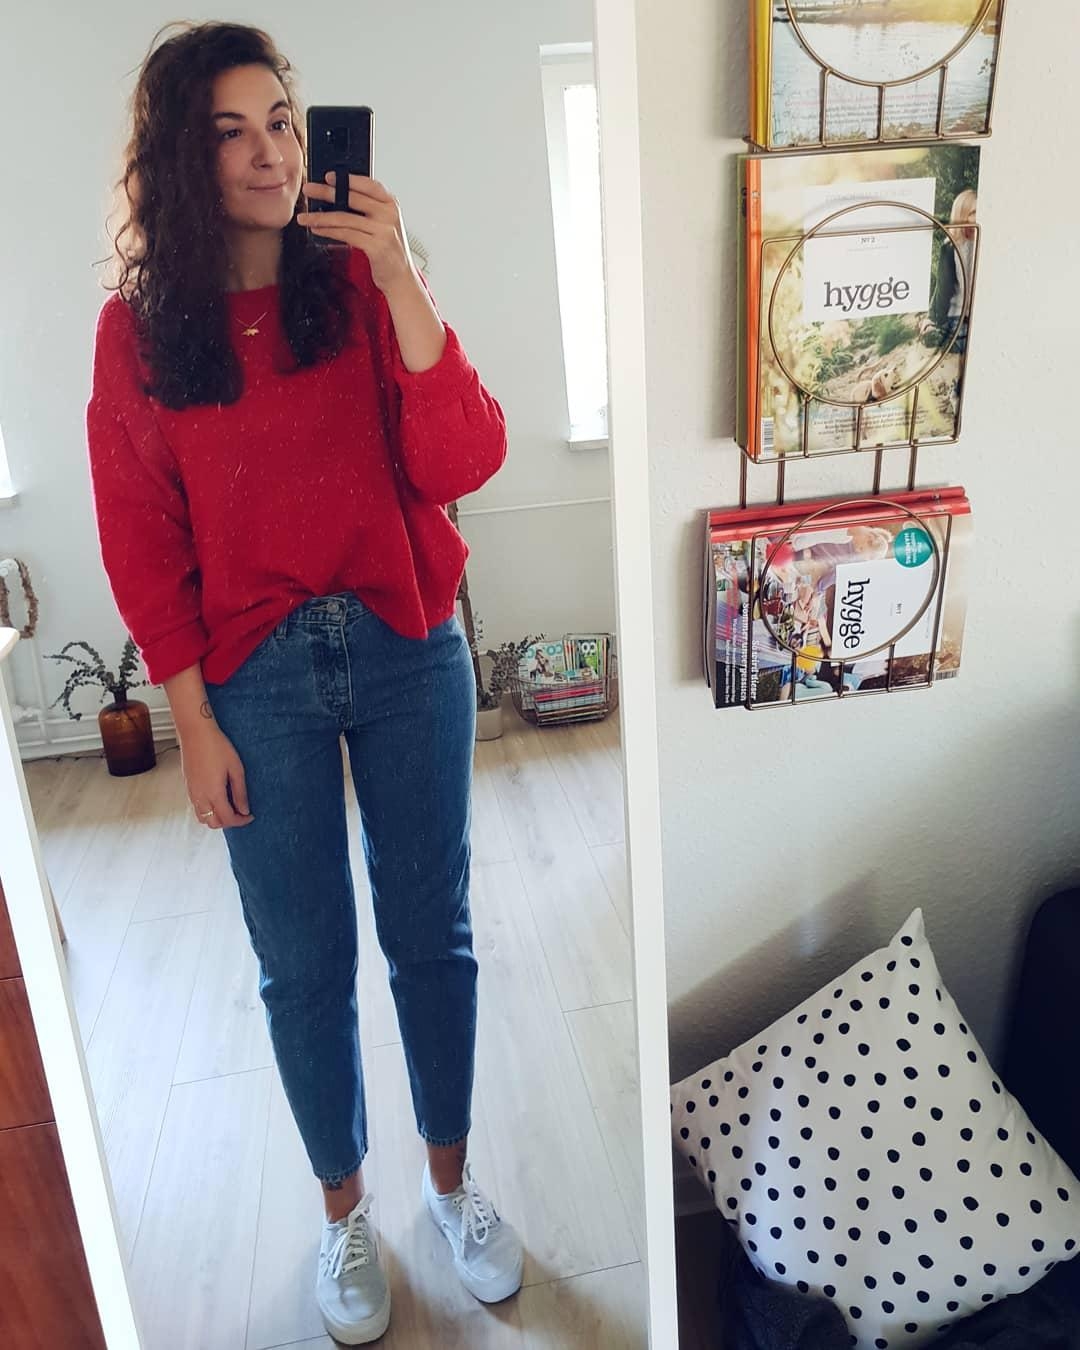 Momentanes Lieblingsoutfit: #momjeans + #cozysweater ❤ #fashion #outfit #styleinspo #messyhair #curlyhair #sweaterweather